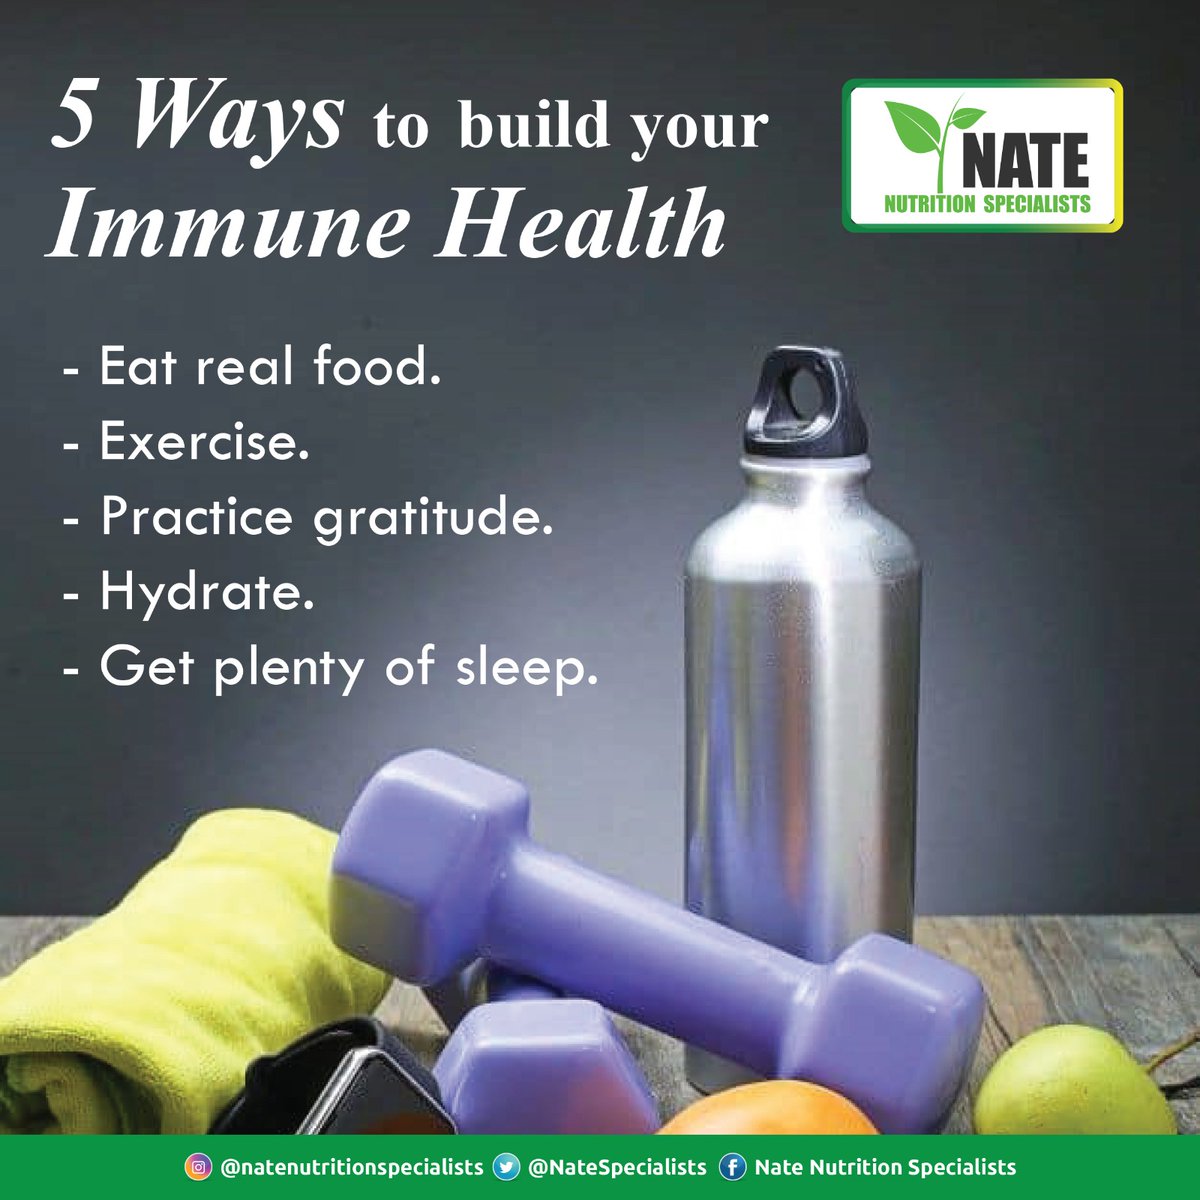 Looking to supercharge your immune system? Here are some tips to boost your immunity naturally. 

Remember, a strong immune system is your body's best defense!💪💚.
 
#boostimmunity.

#buildyourmmunehealth.

#healthylifestyle.